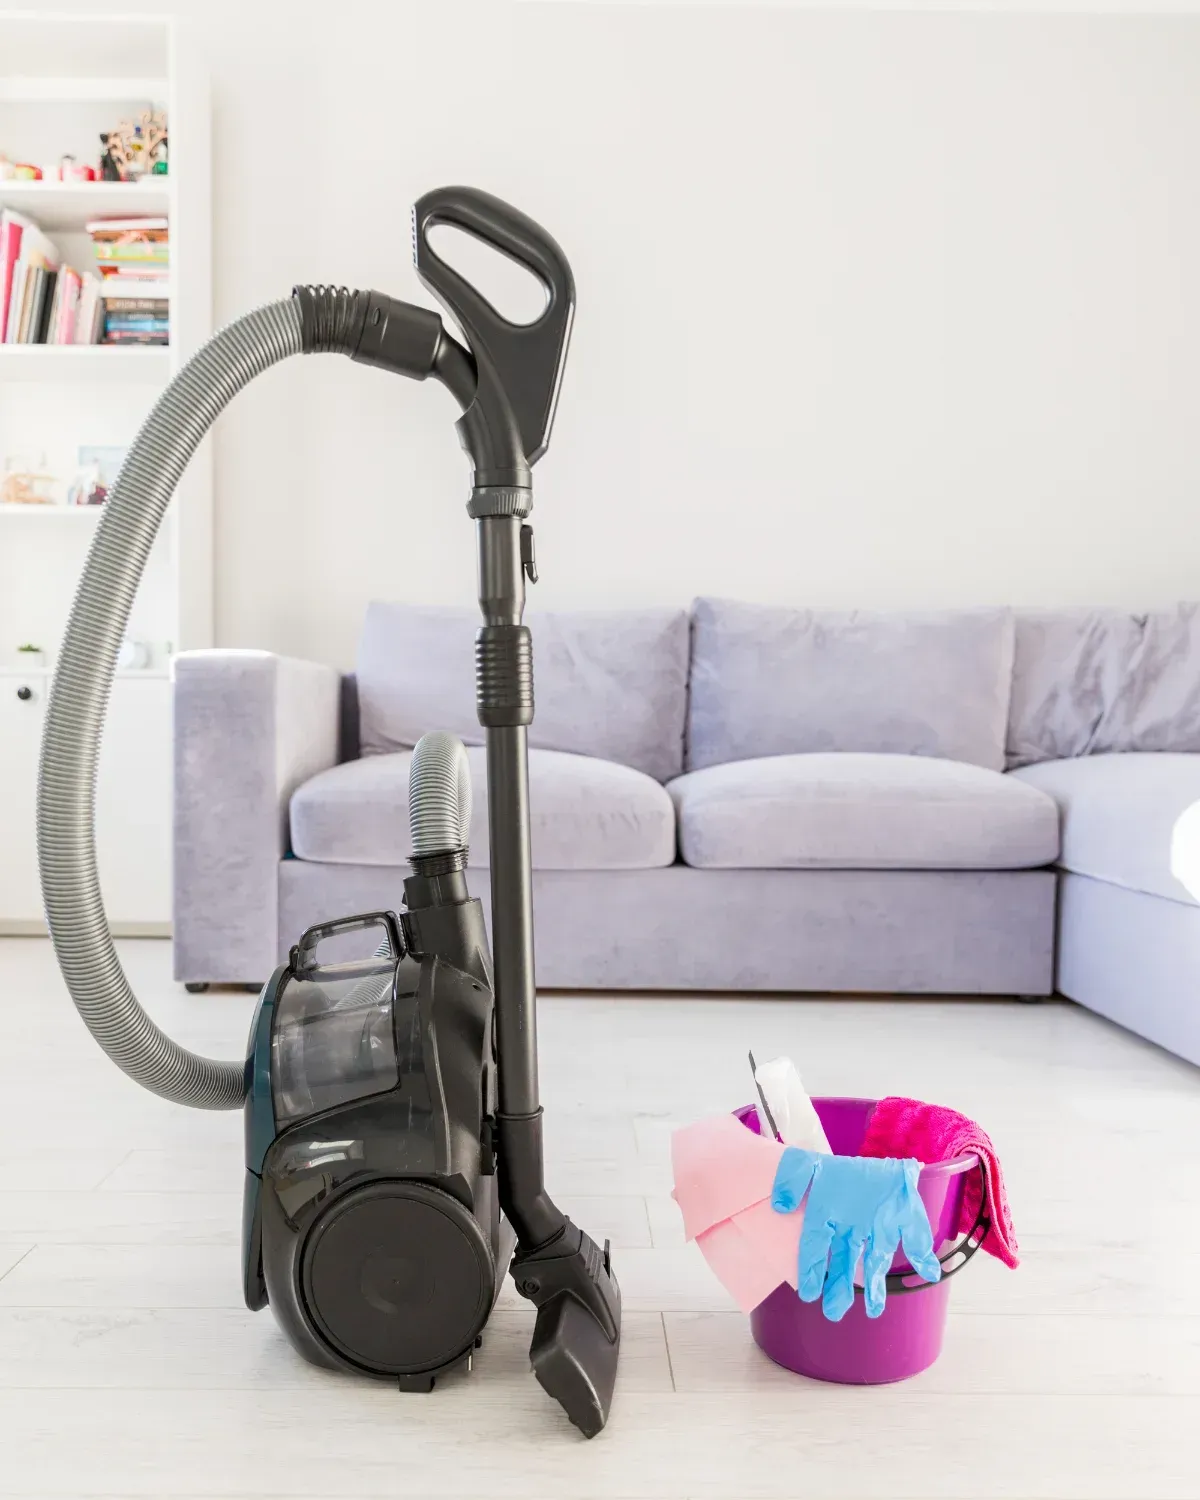 carpet cleaning in delta bc